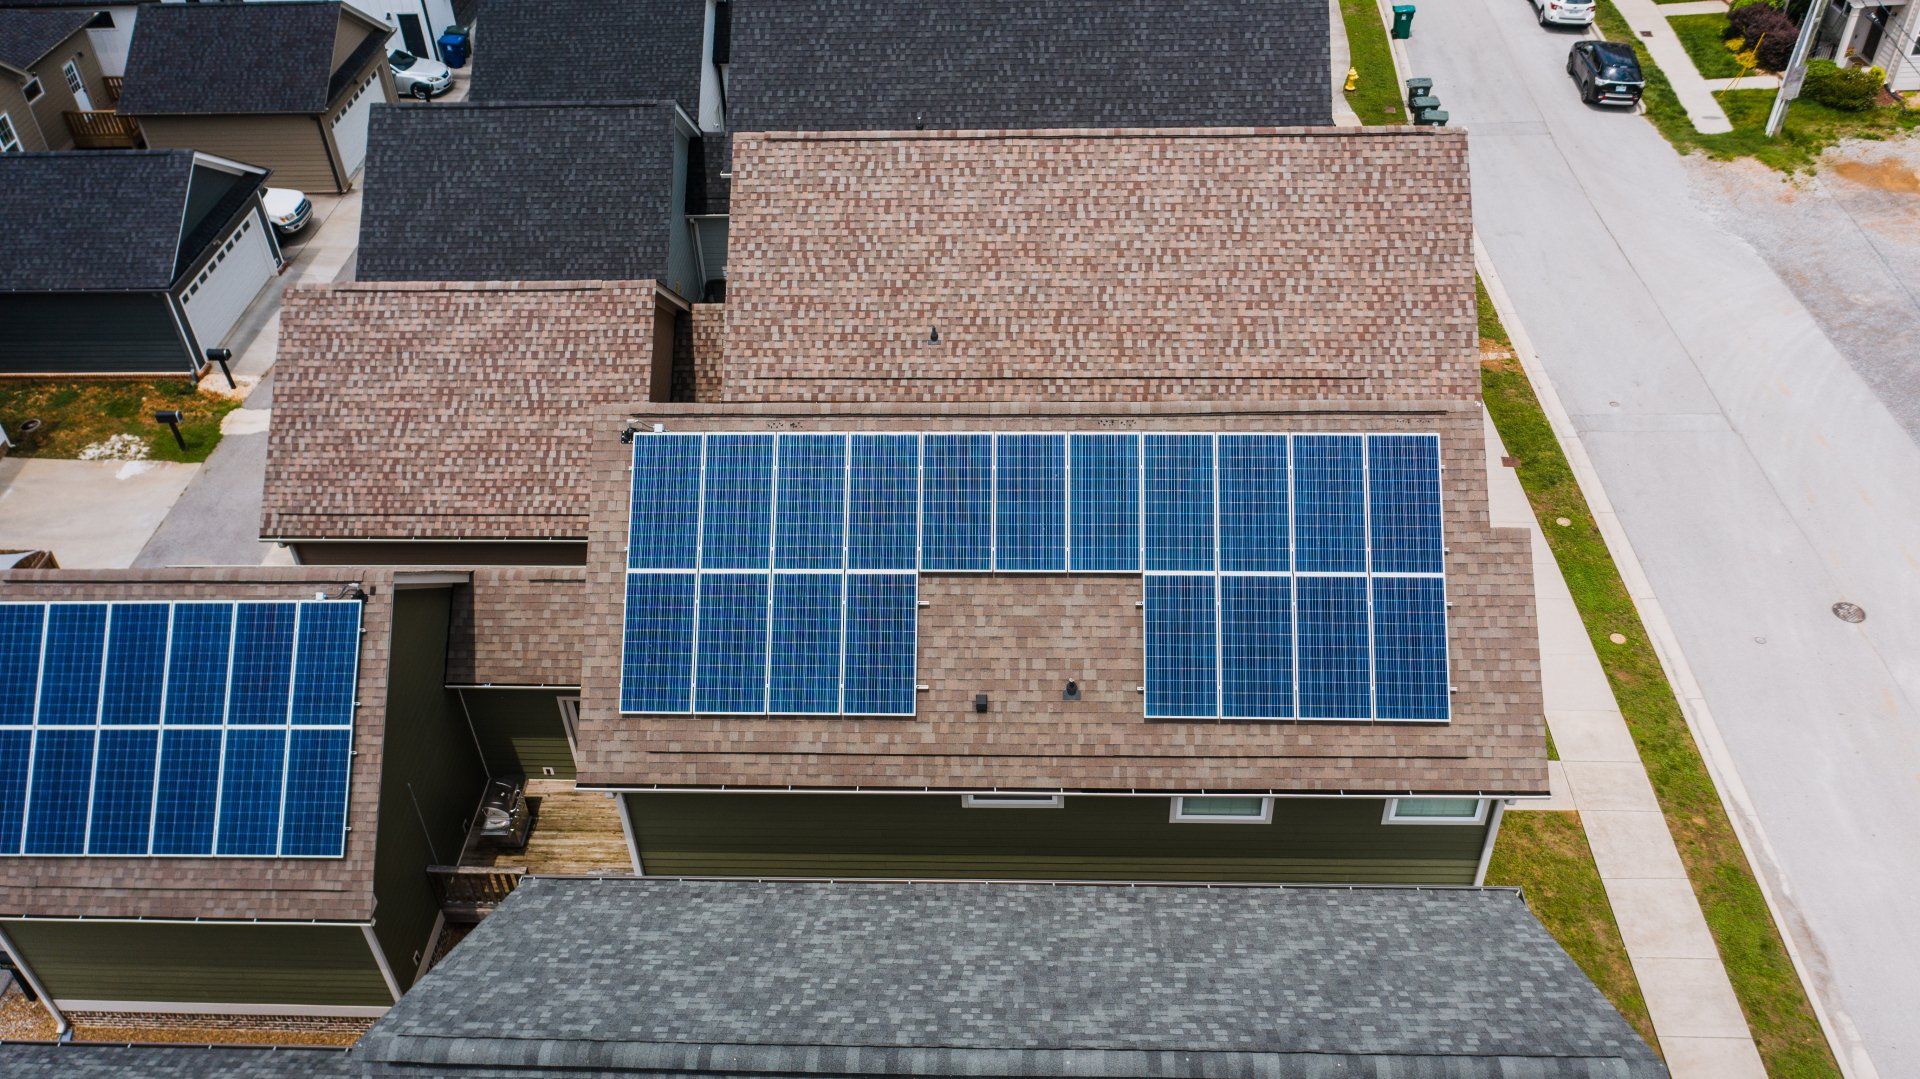 Overhead view of a house with solar panels installed